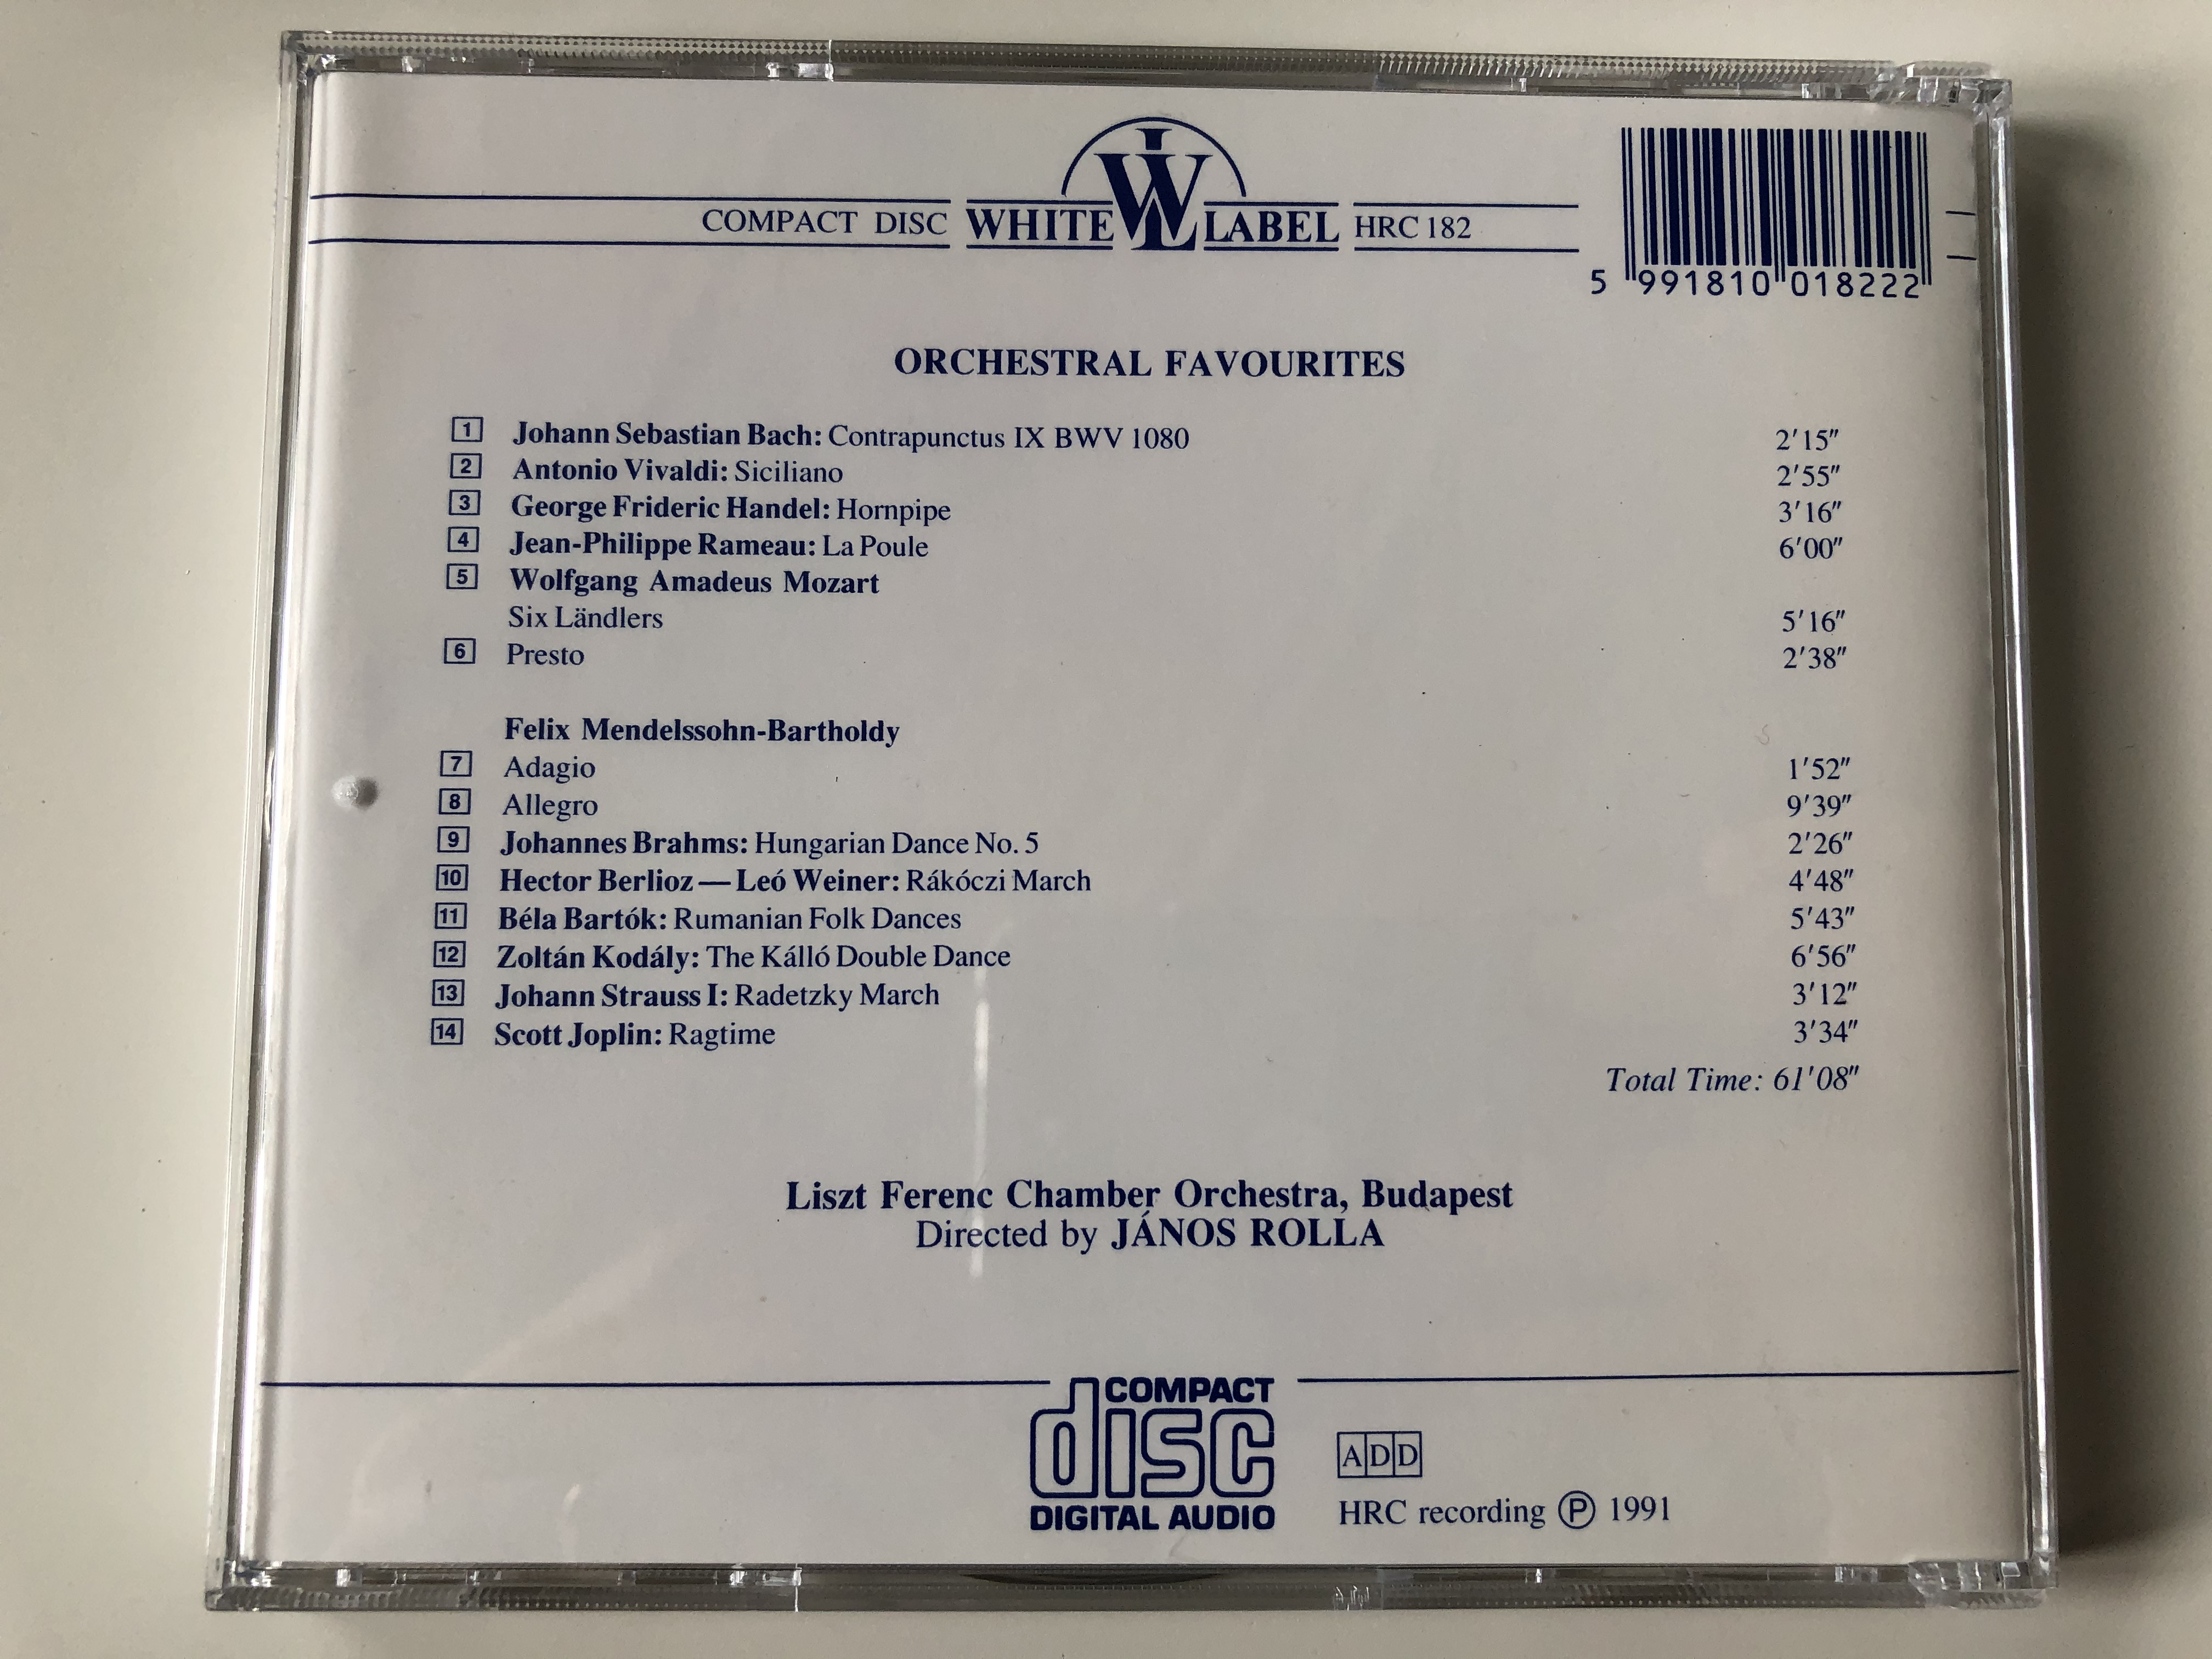 orchestral-favourites-from-vivaldi-to-joplin-liszt-ferenc-chamber-orchestra-janos-rolla-hungaroton-audio-cd-1991-stereo-hrc-182-4-.jpg